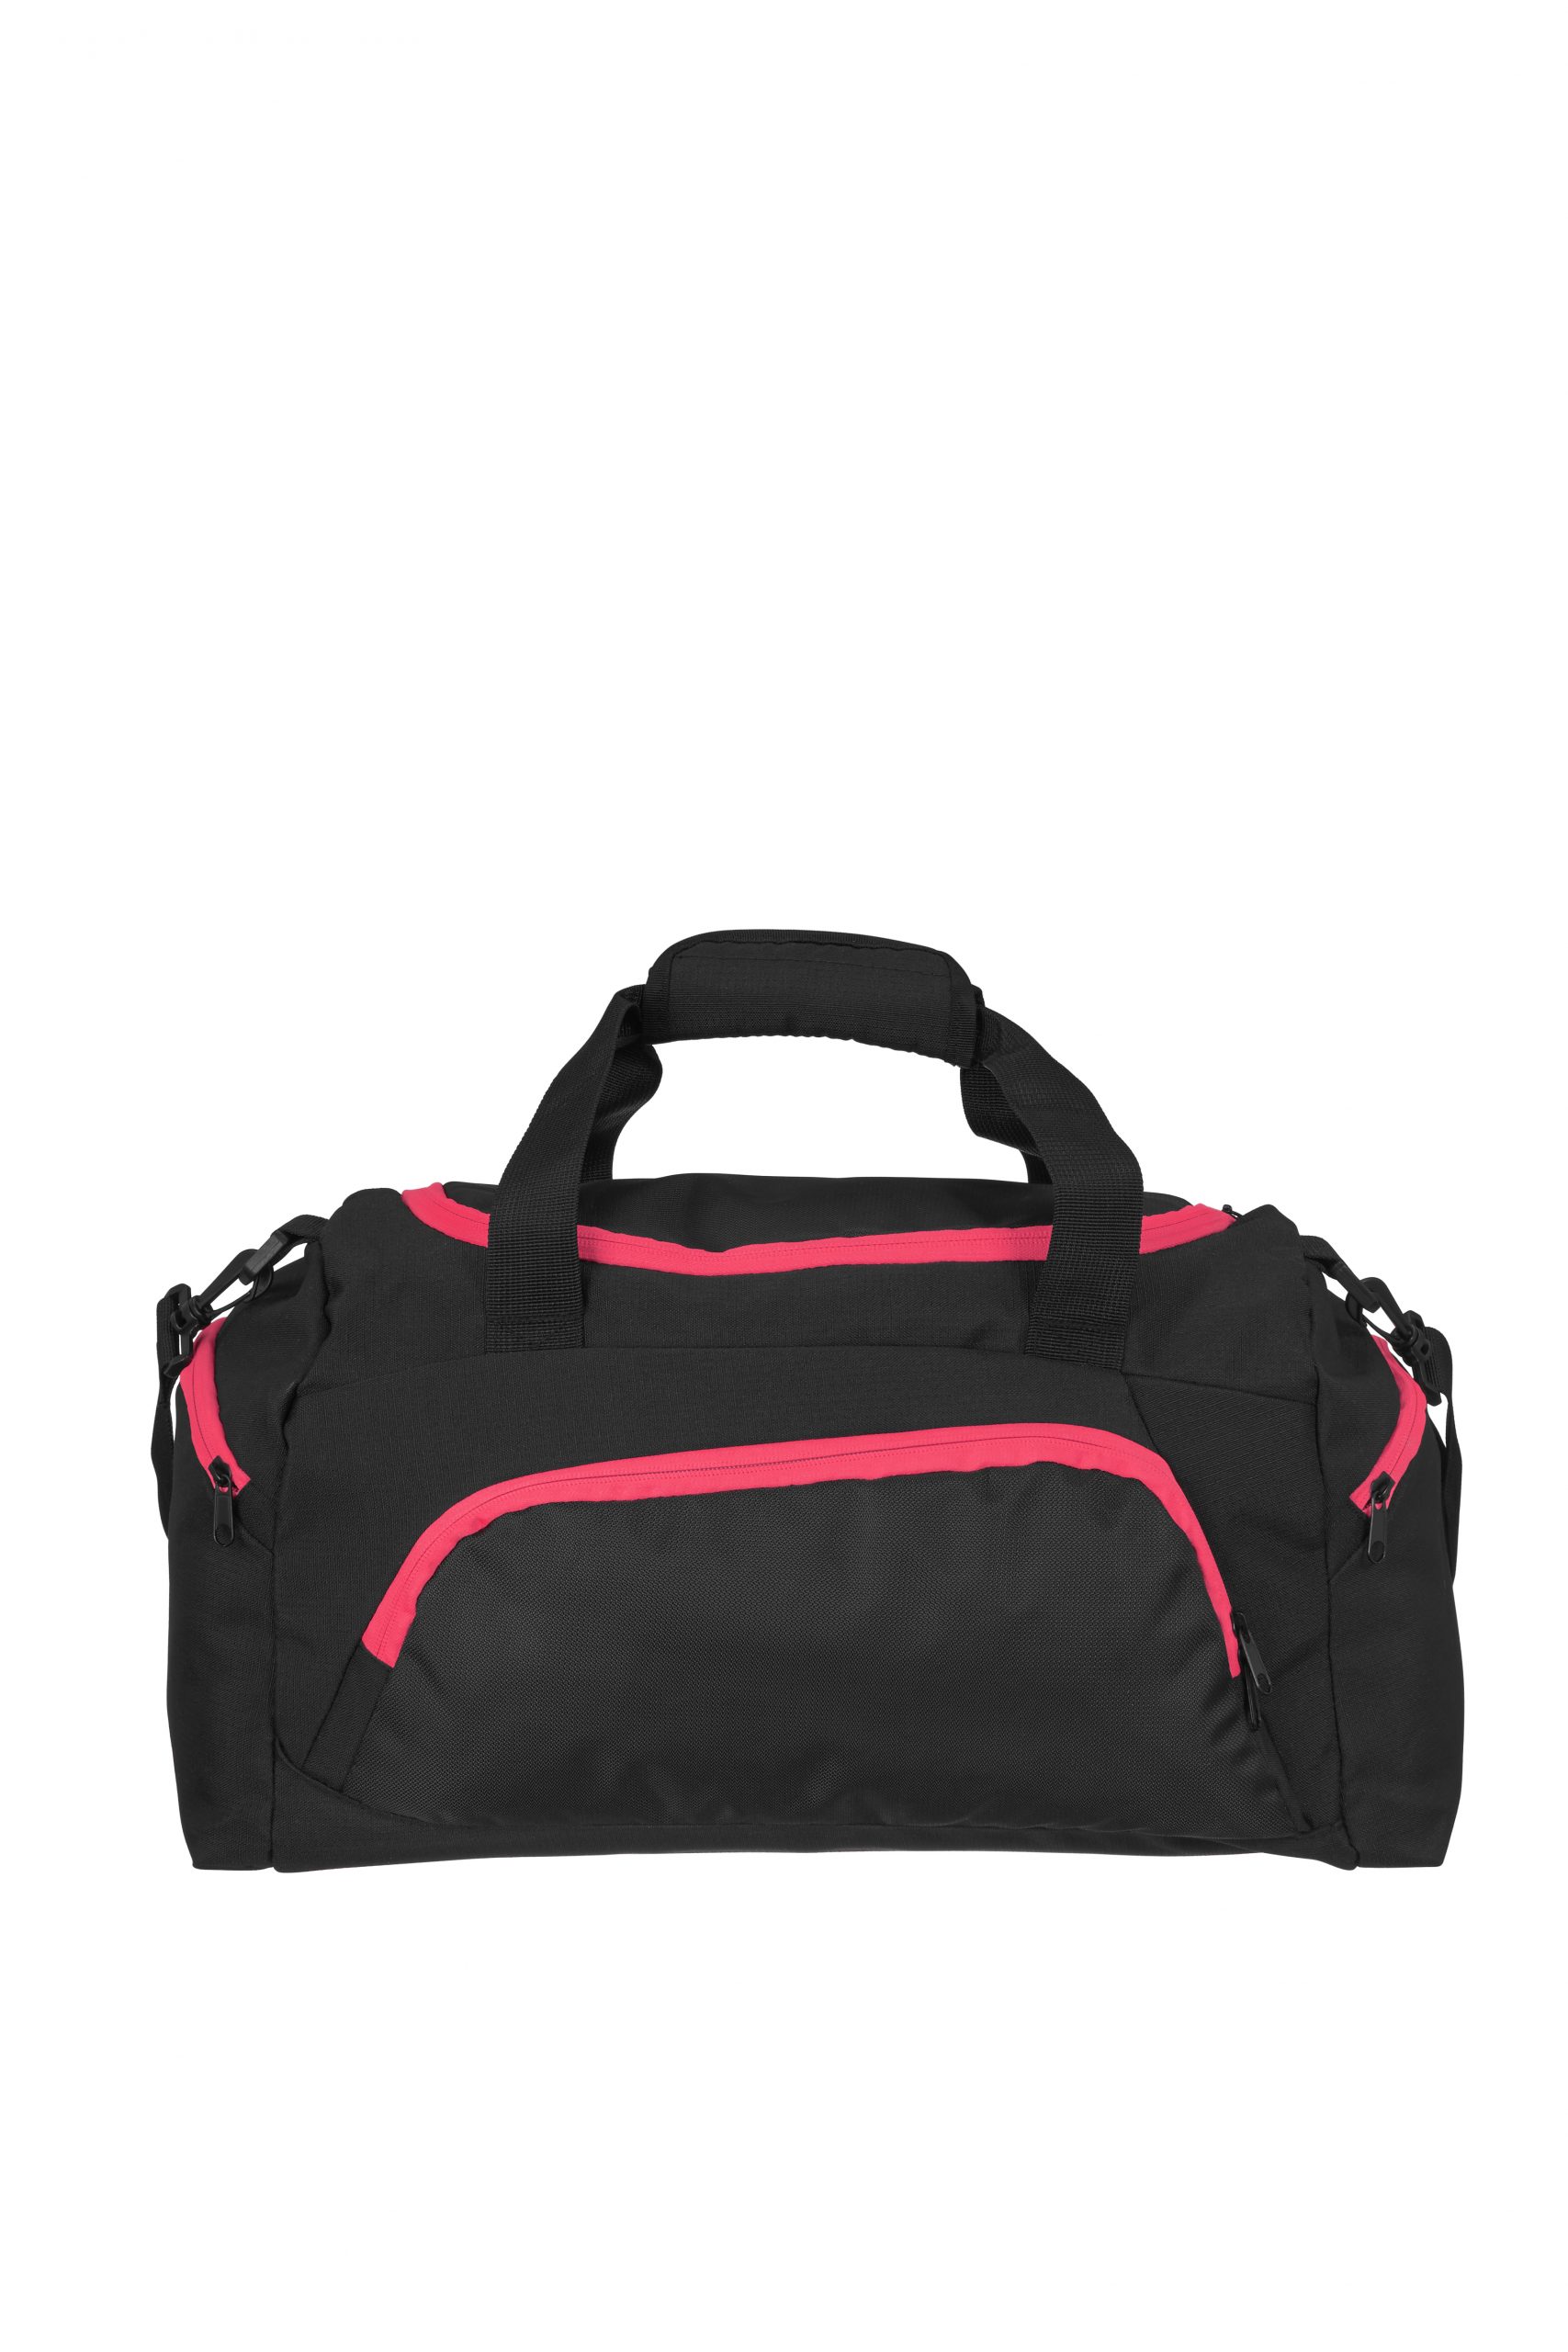 Grizzly Active Line Sportbag small musta/rosa